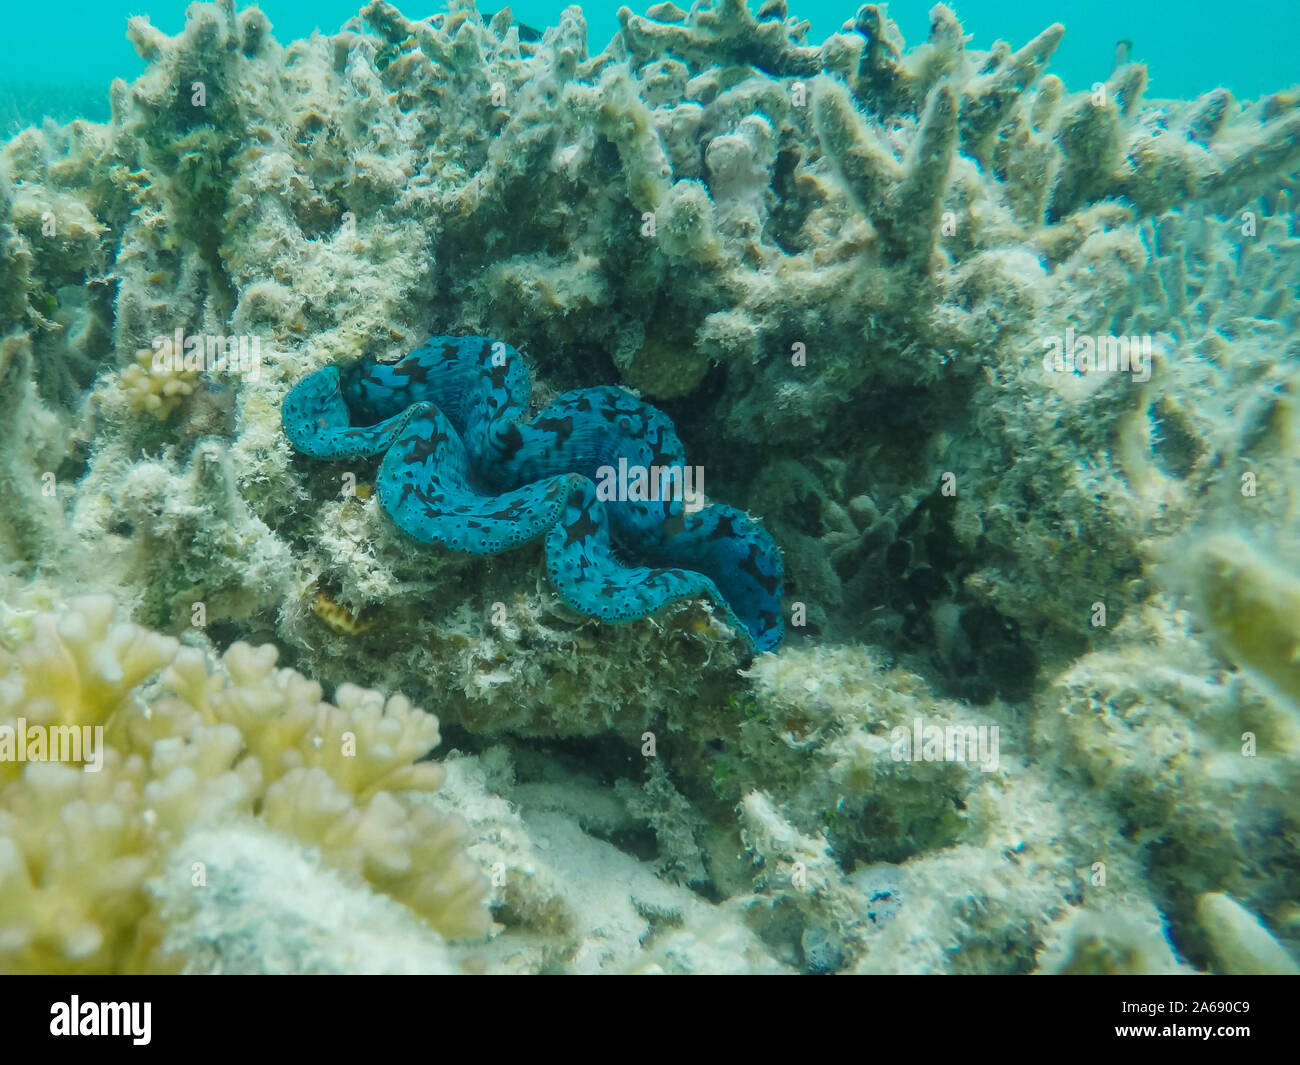 a tridacna clam on a reef at heron island Stock Photo